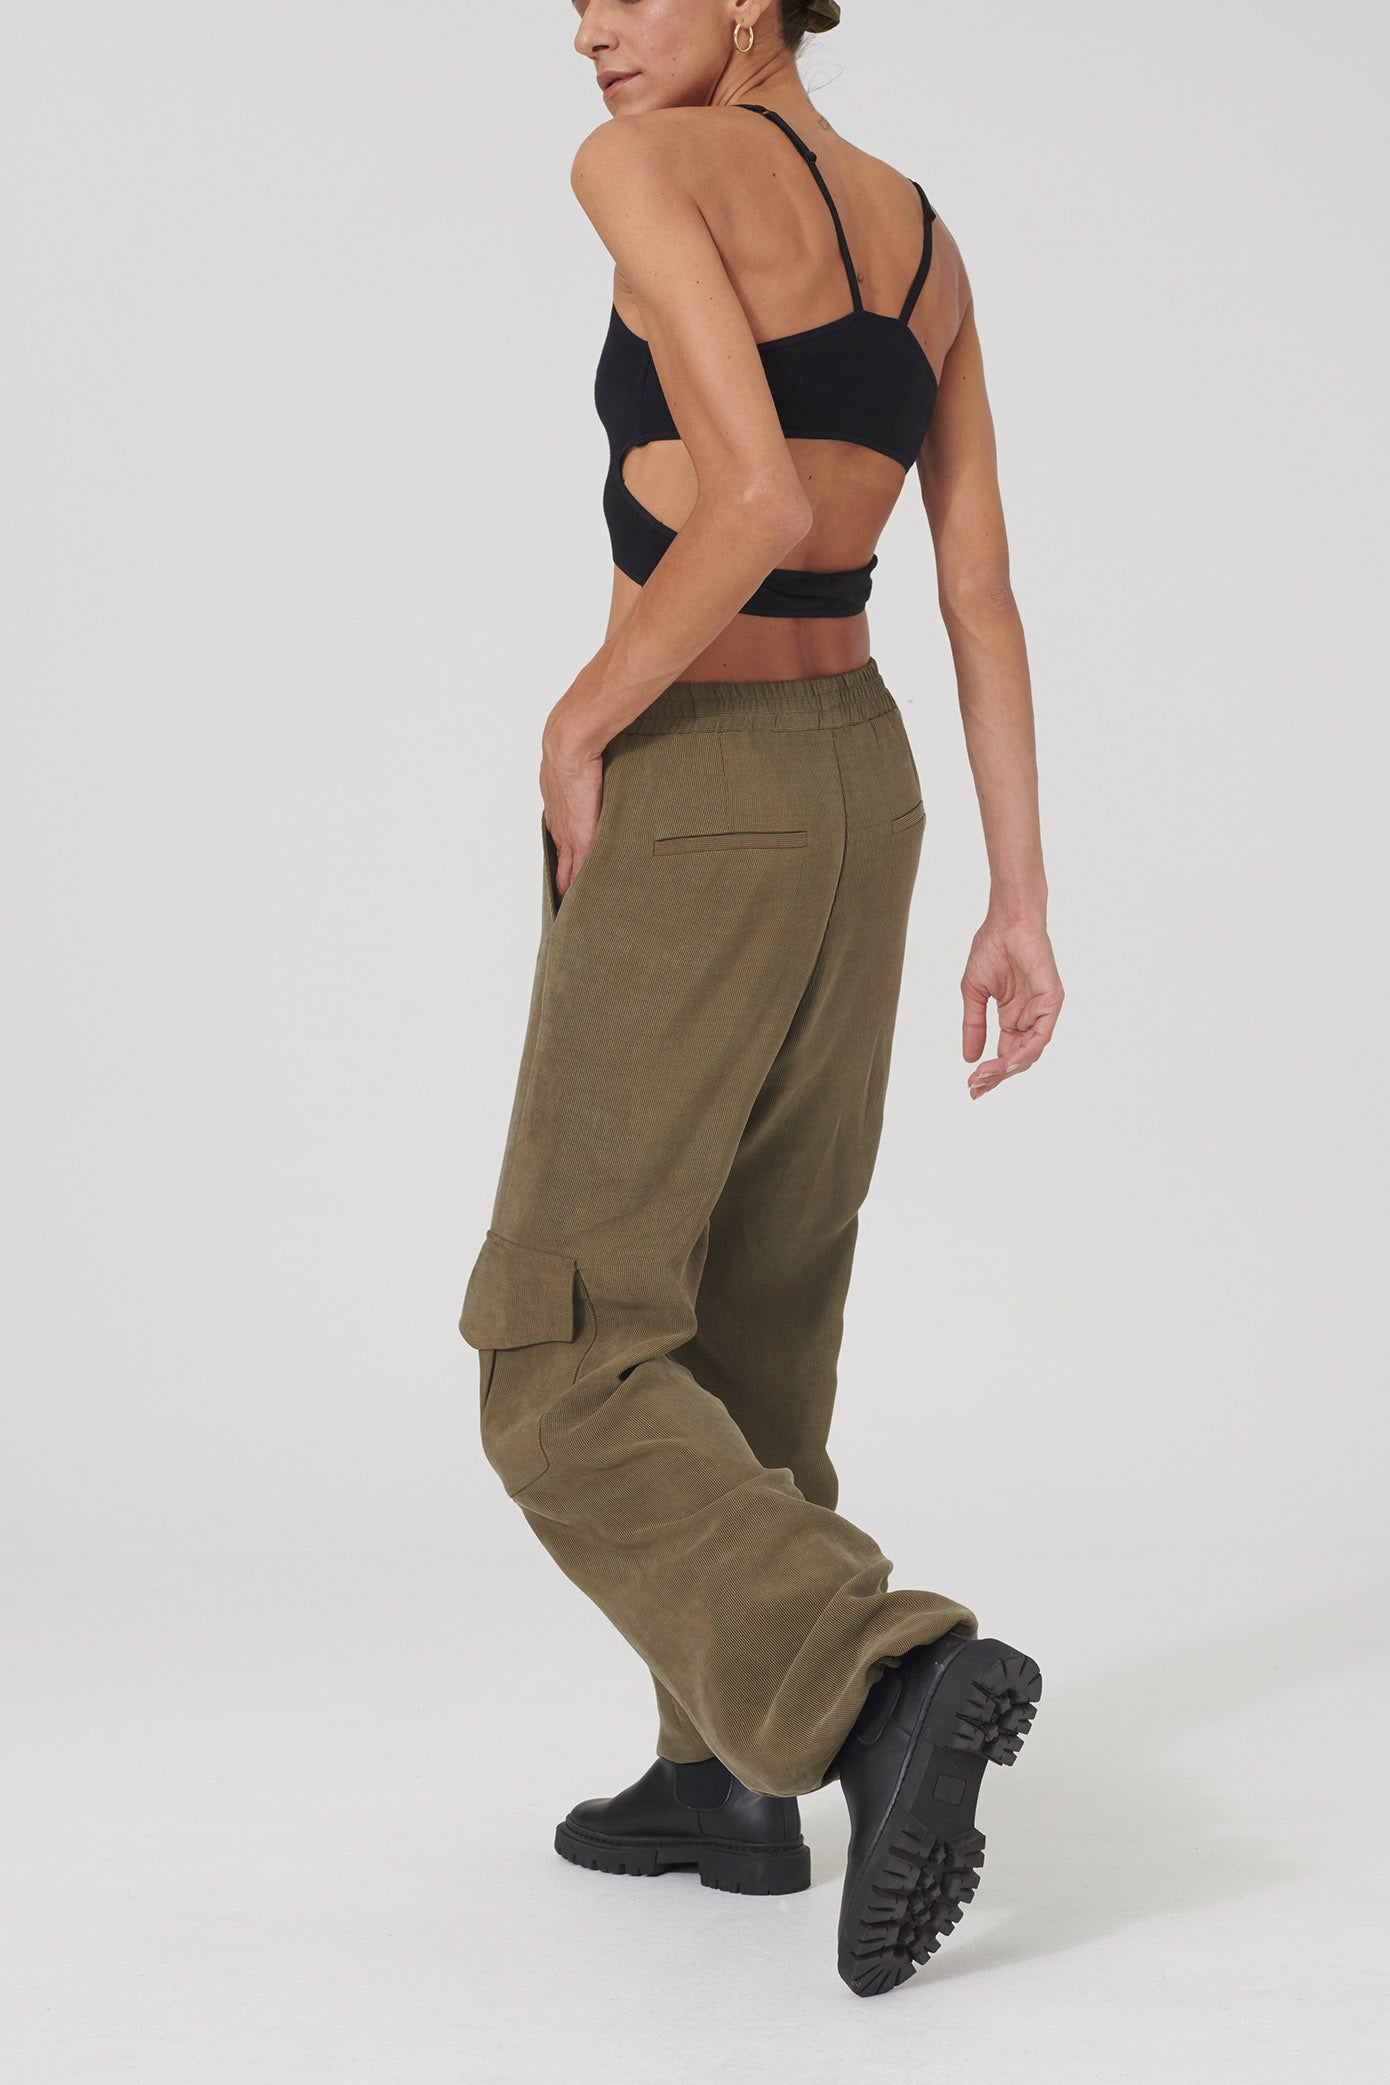 HEDIE trousers in olive color by LOVJOI made from Ecovero™